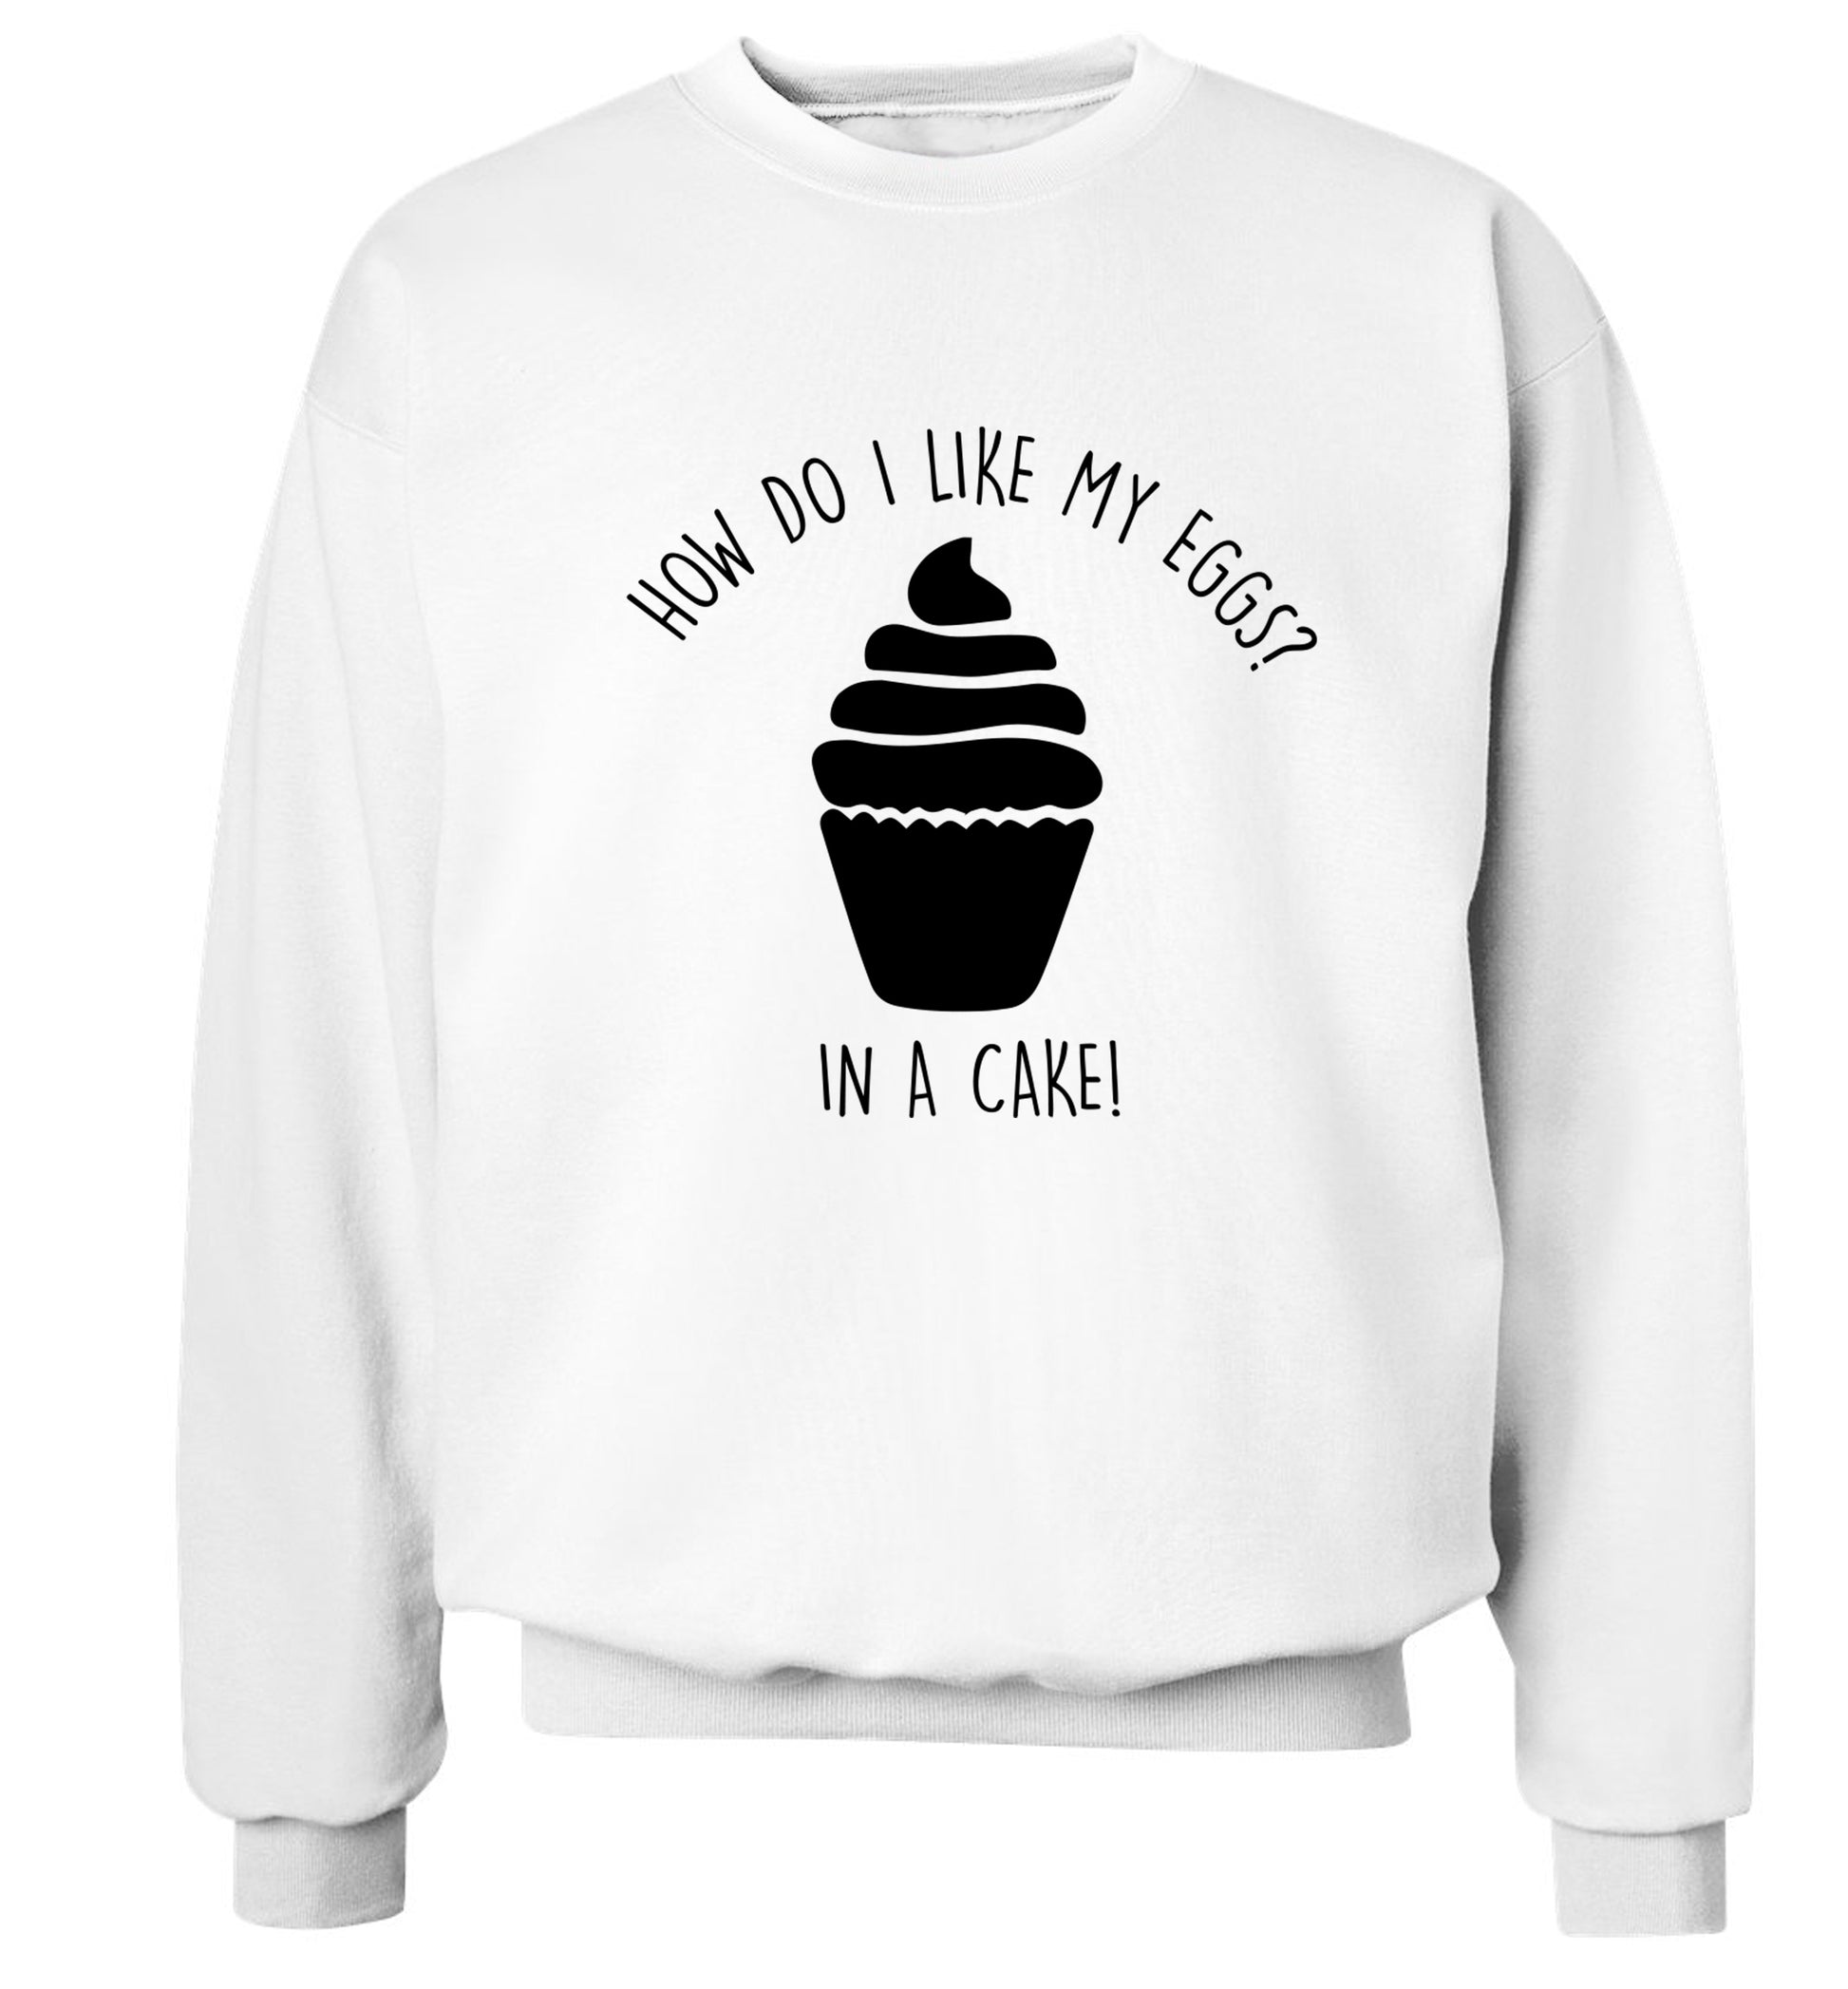 How do I like my eggs? In a cake! Adult's unisex white Sweater 2XL